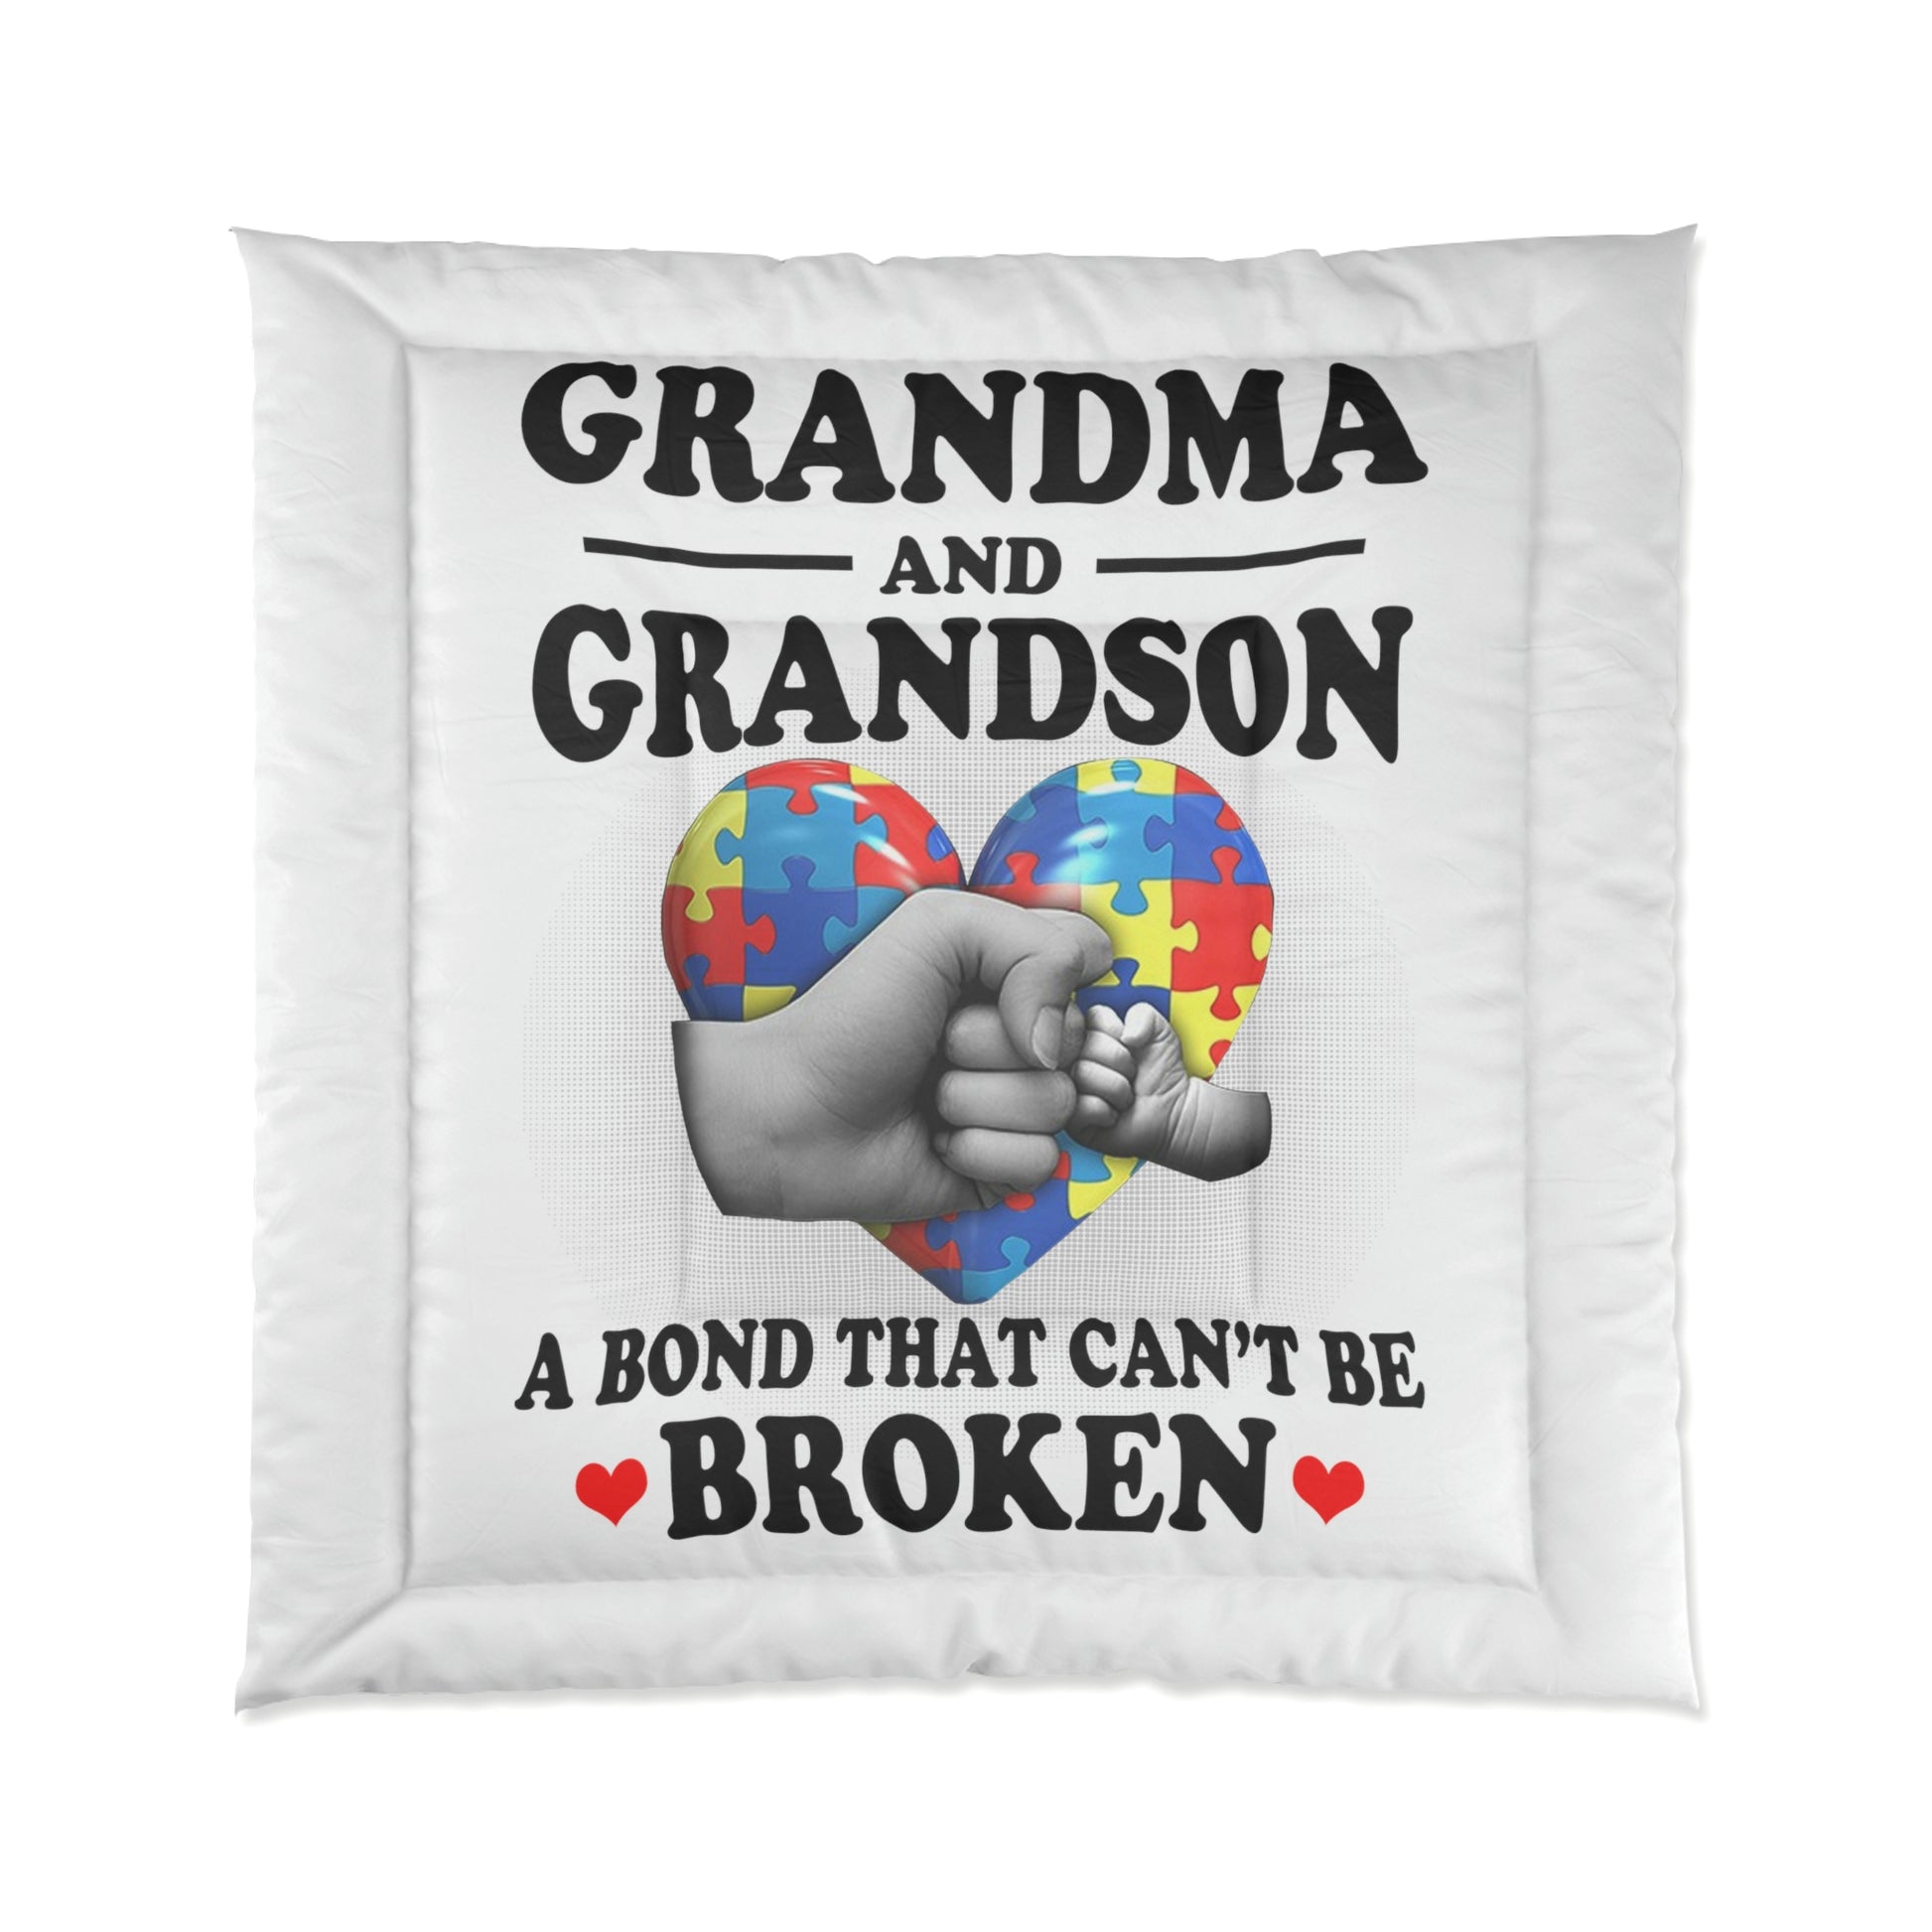 Comforter Grandma and Grandson Bond, Gift for Mom, Special moment - Digital By M&B